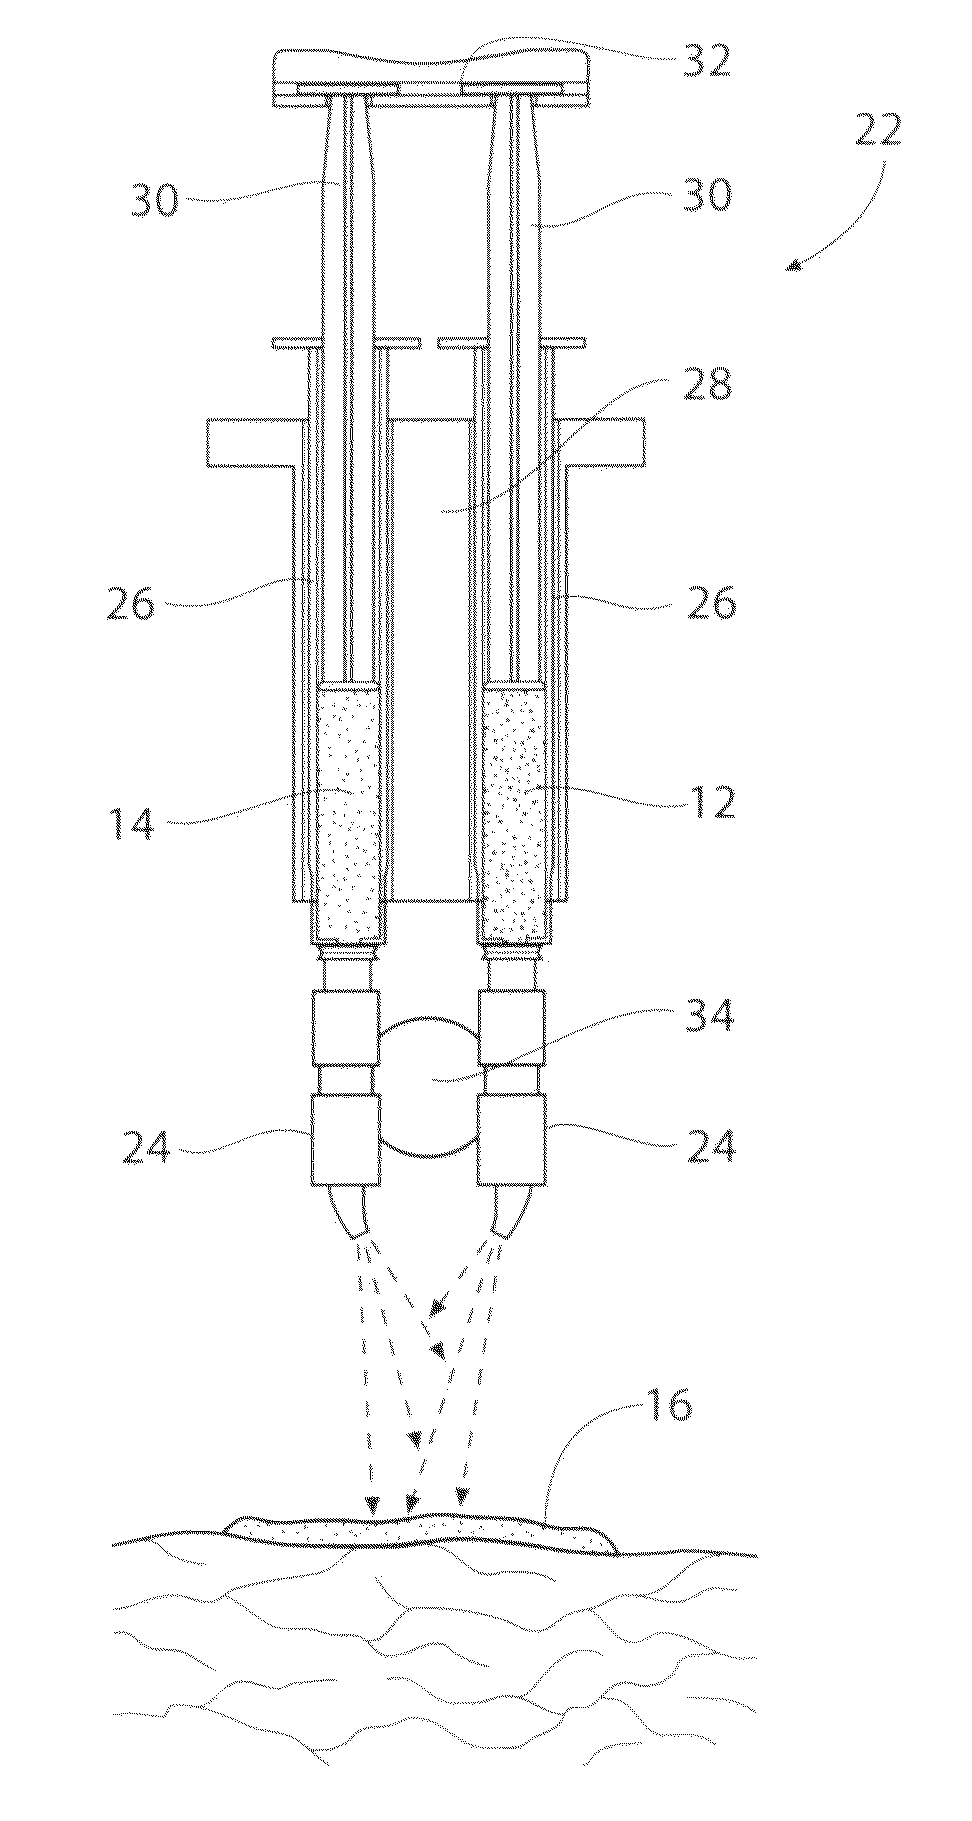 Wound treatment systems, devices, and methods using biocompatible synthetic hydrogel compositions